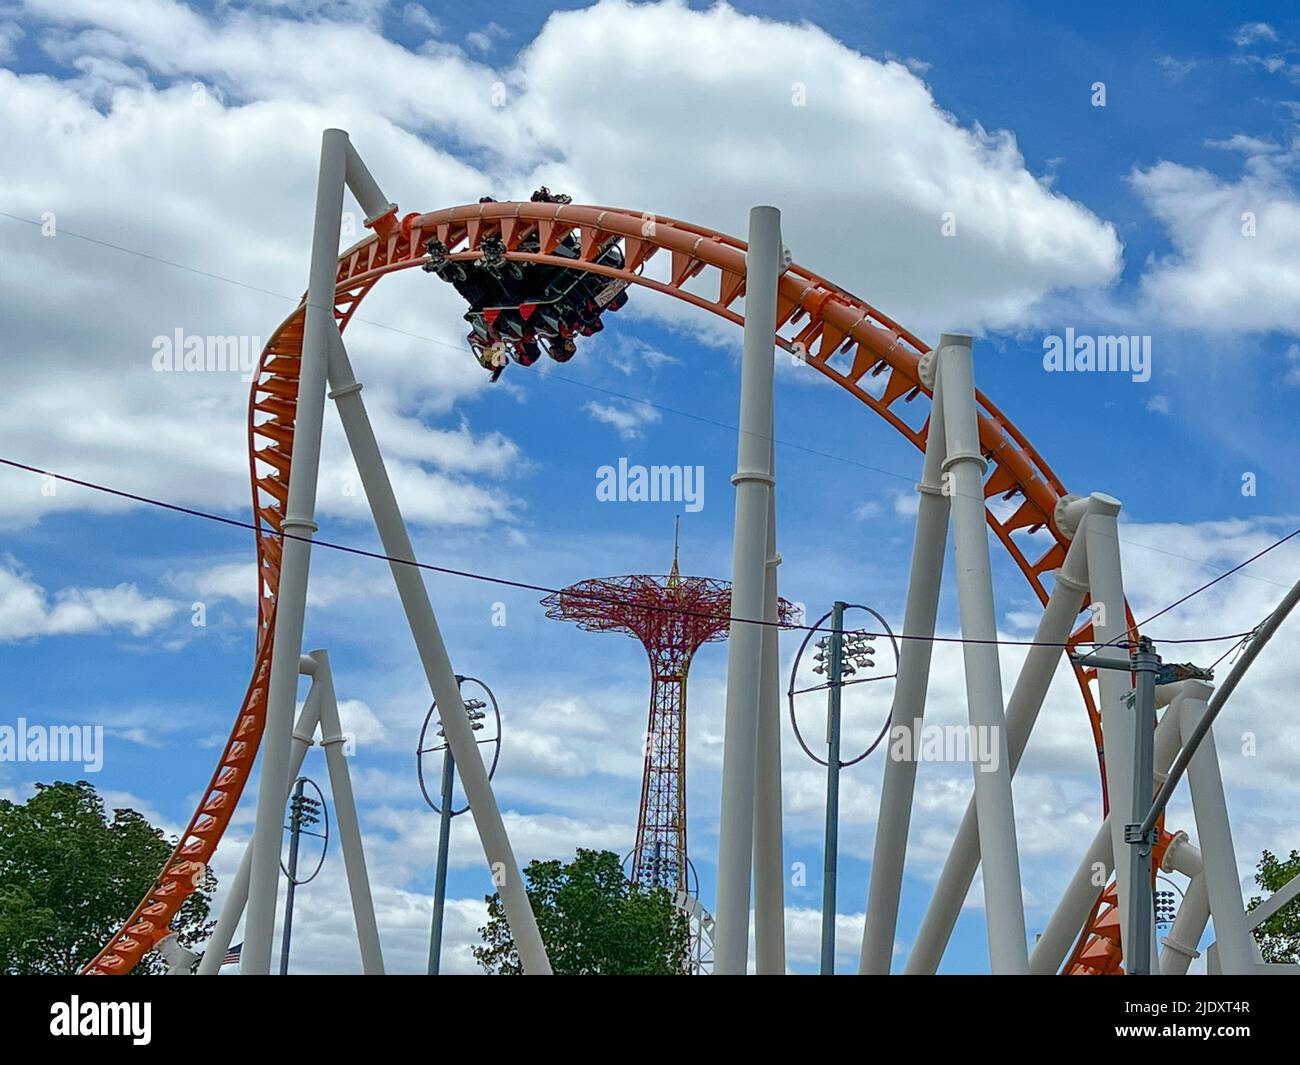 People ride the fast moving Thunderbolt roller coaster at Coney Island, Brooklyn, New York. Stock Photo